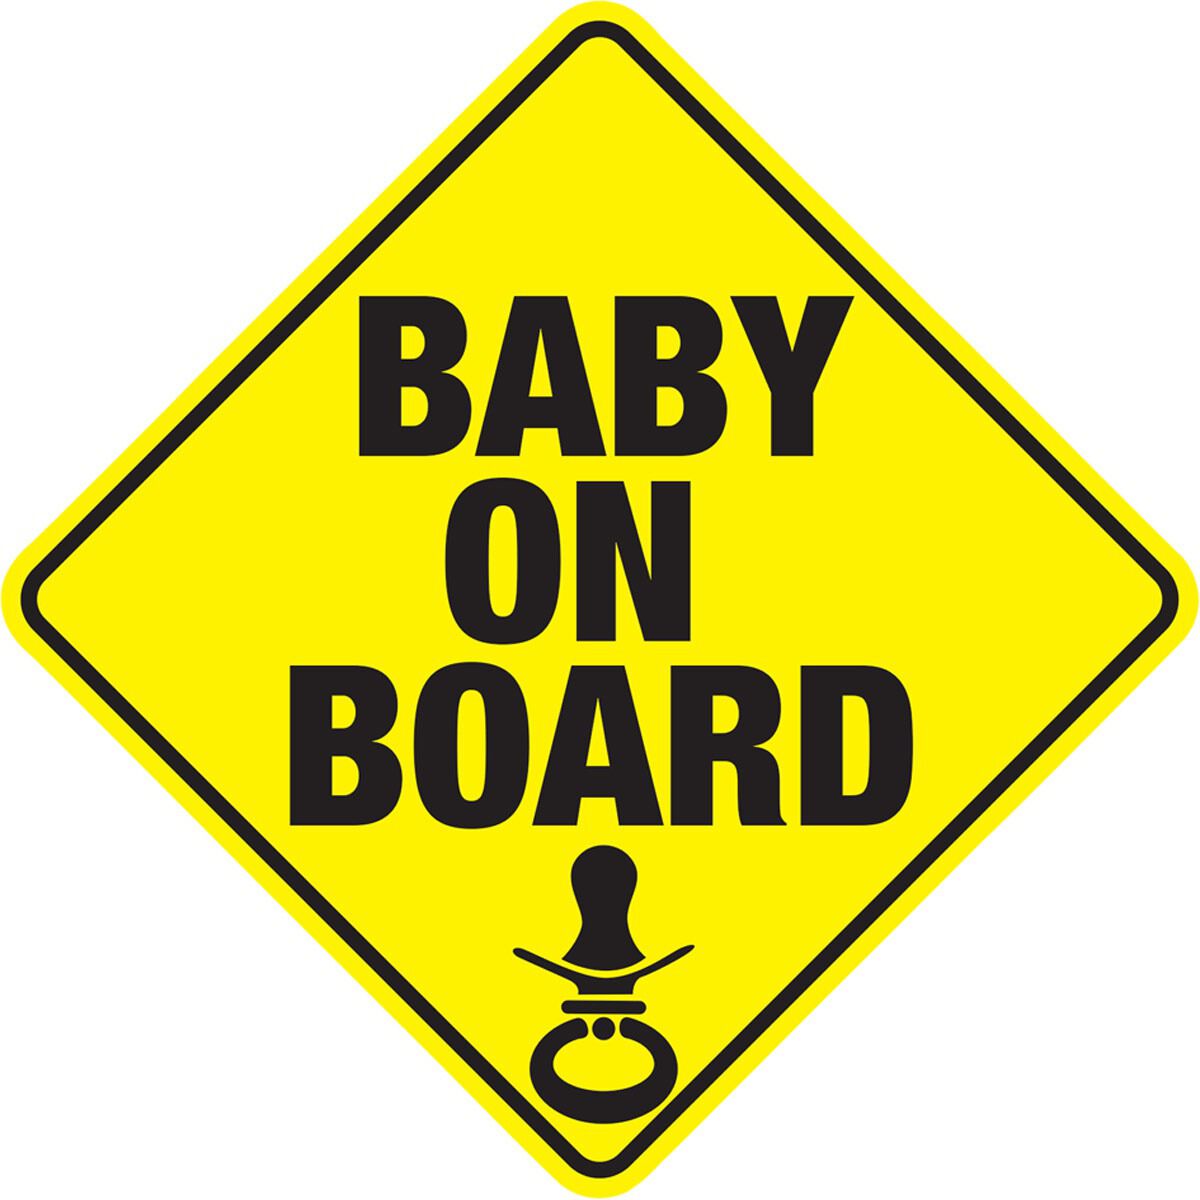 BABY ON BOARD Window Decal/Sticker Pink 5.5"H 